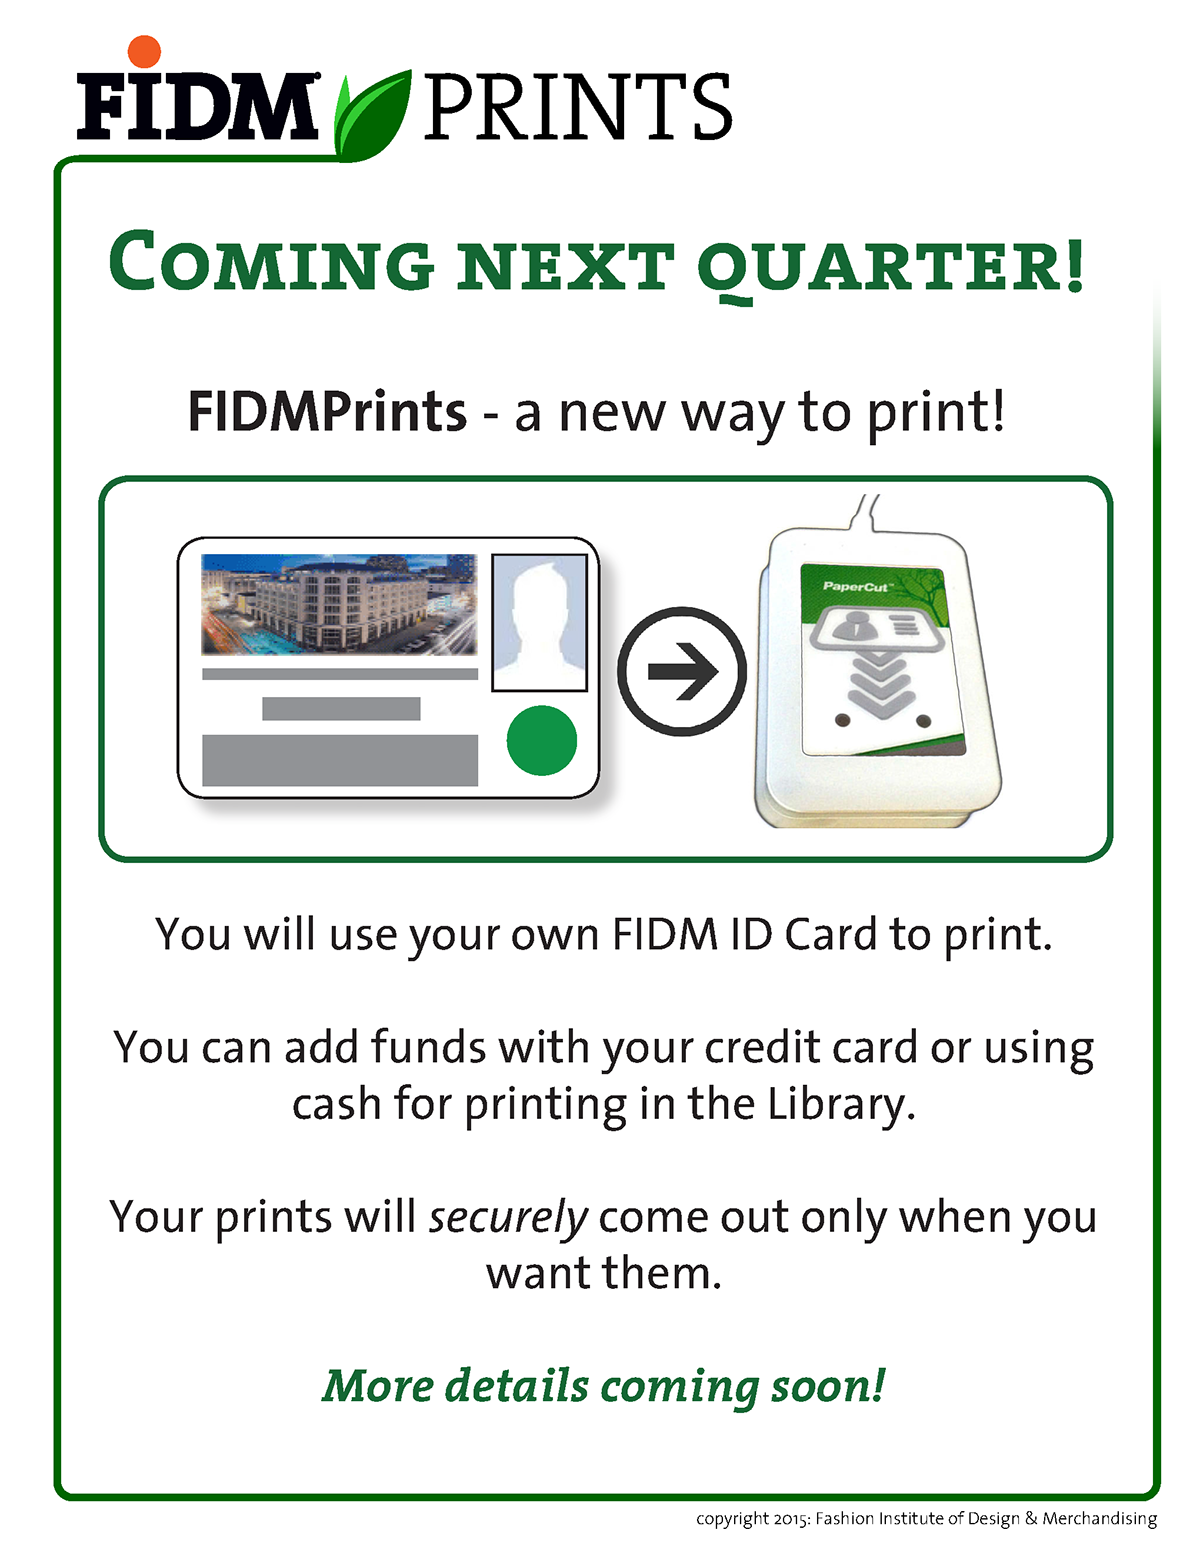 Printing your tags here just add commas Anything FIDM